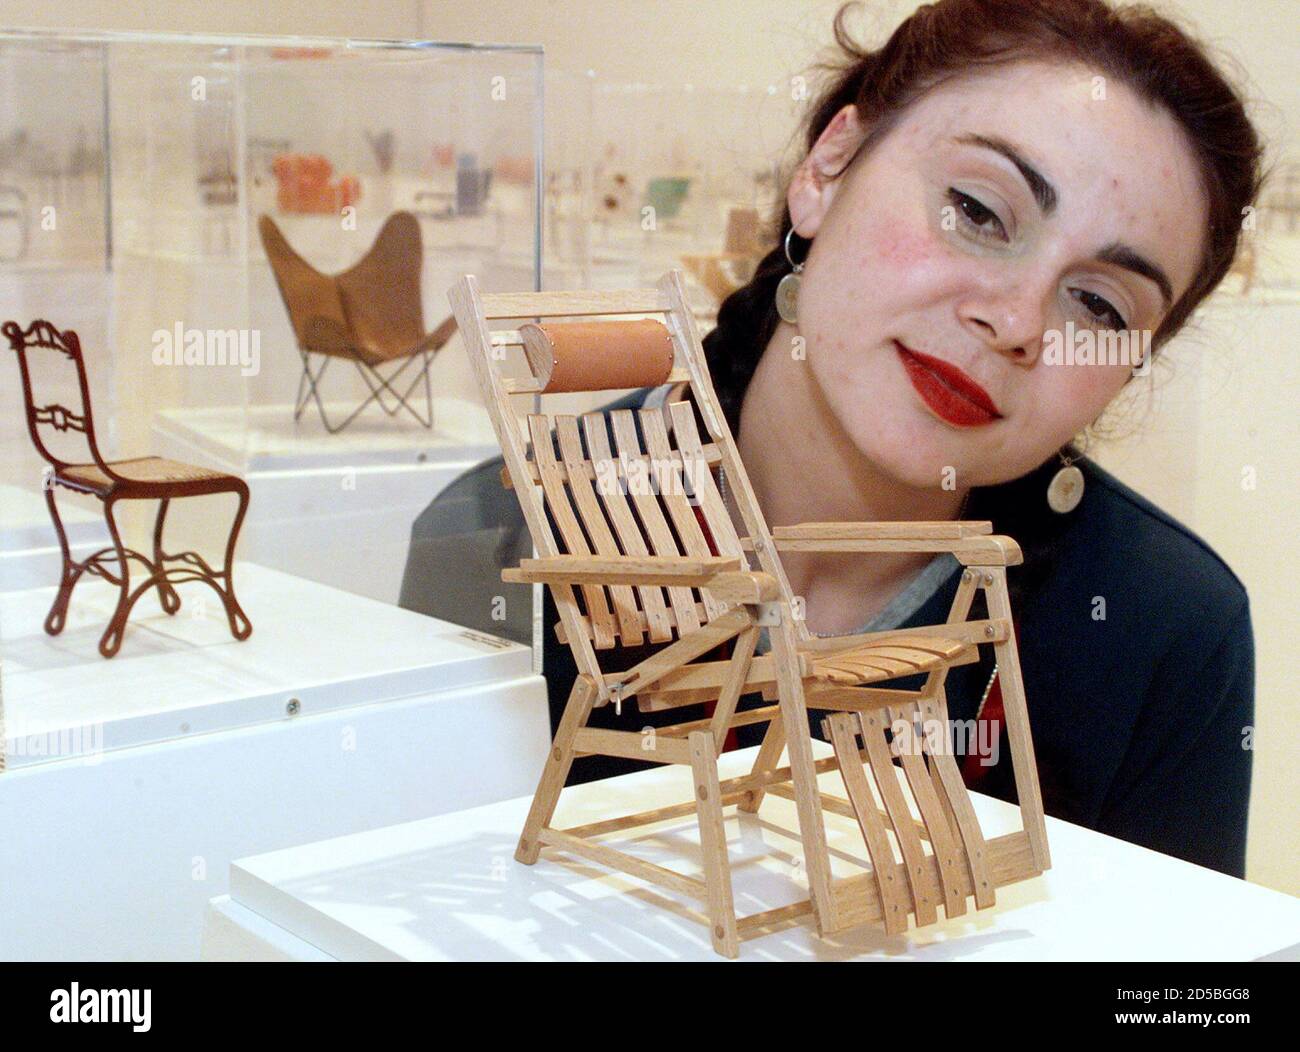 Melbourne gallery administrator Deonisia  Soundias looks at a miniature model of a wooden chair, the 'Siesta Medizinal' on display at the Royal Melbourne Institute of Technology (RMIT) Gallery April 21. The chair, designed and built in 1936 by Hans and Wassily Luckhardt of Germany,  joins 99 others in the Dimensions of Design - 100 Classic Seats exhibition. The miniature reproductions, true to the workmanship, detail and materials of the original, are on a national tour. **DIGITAL IMAGE** Stock Photo